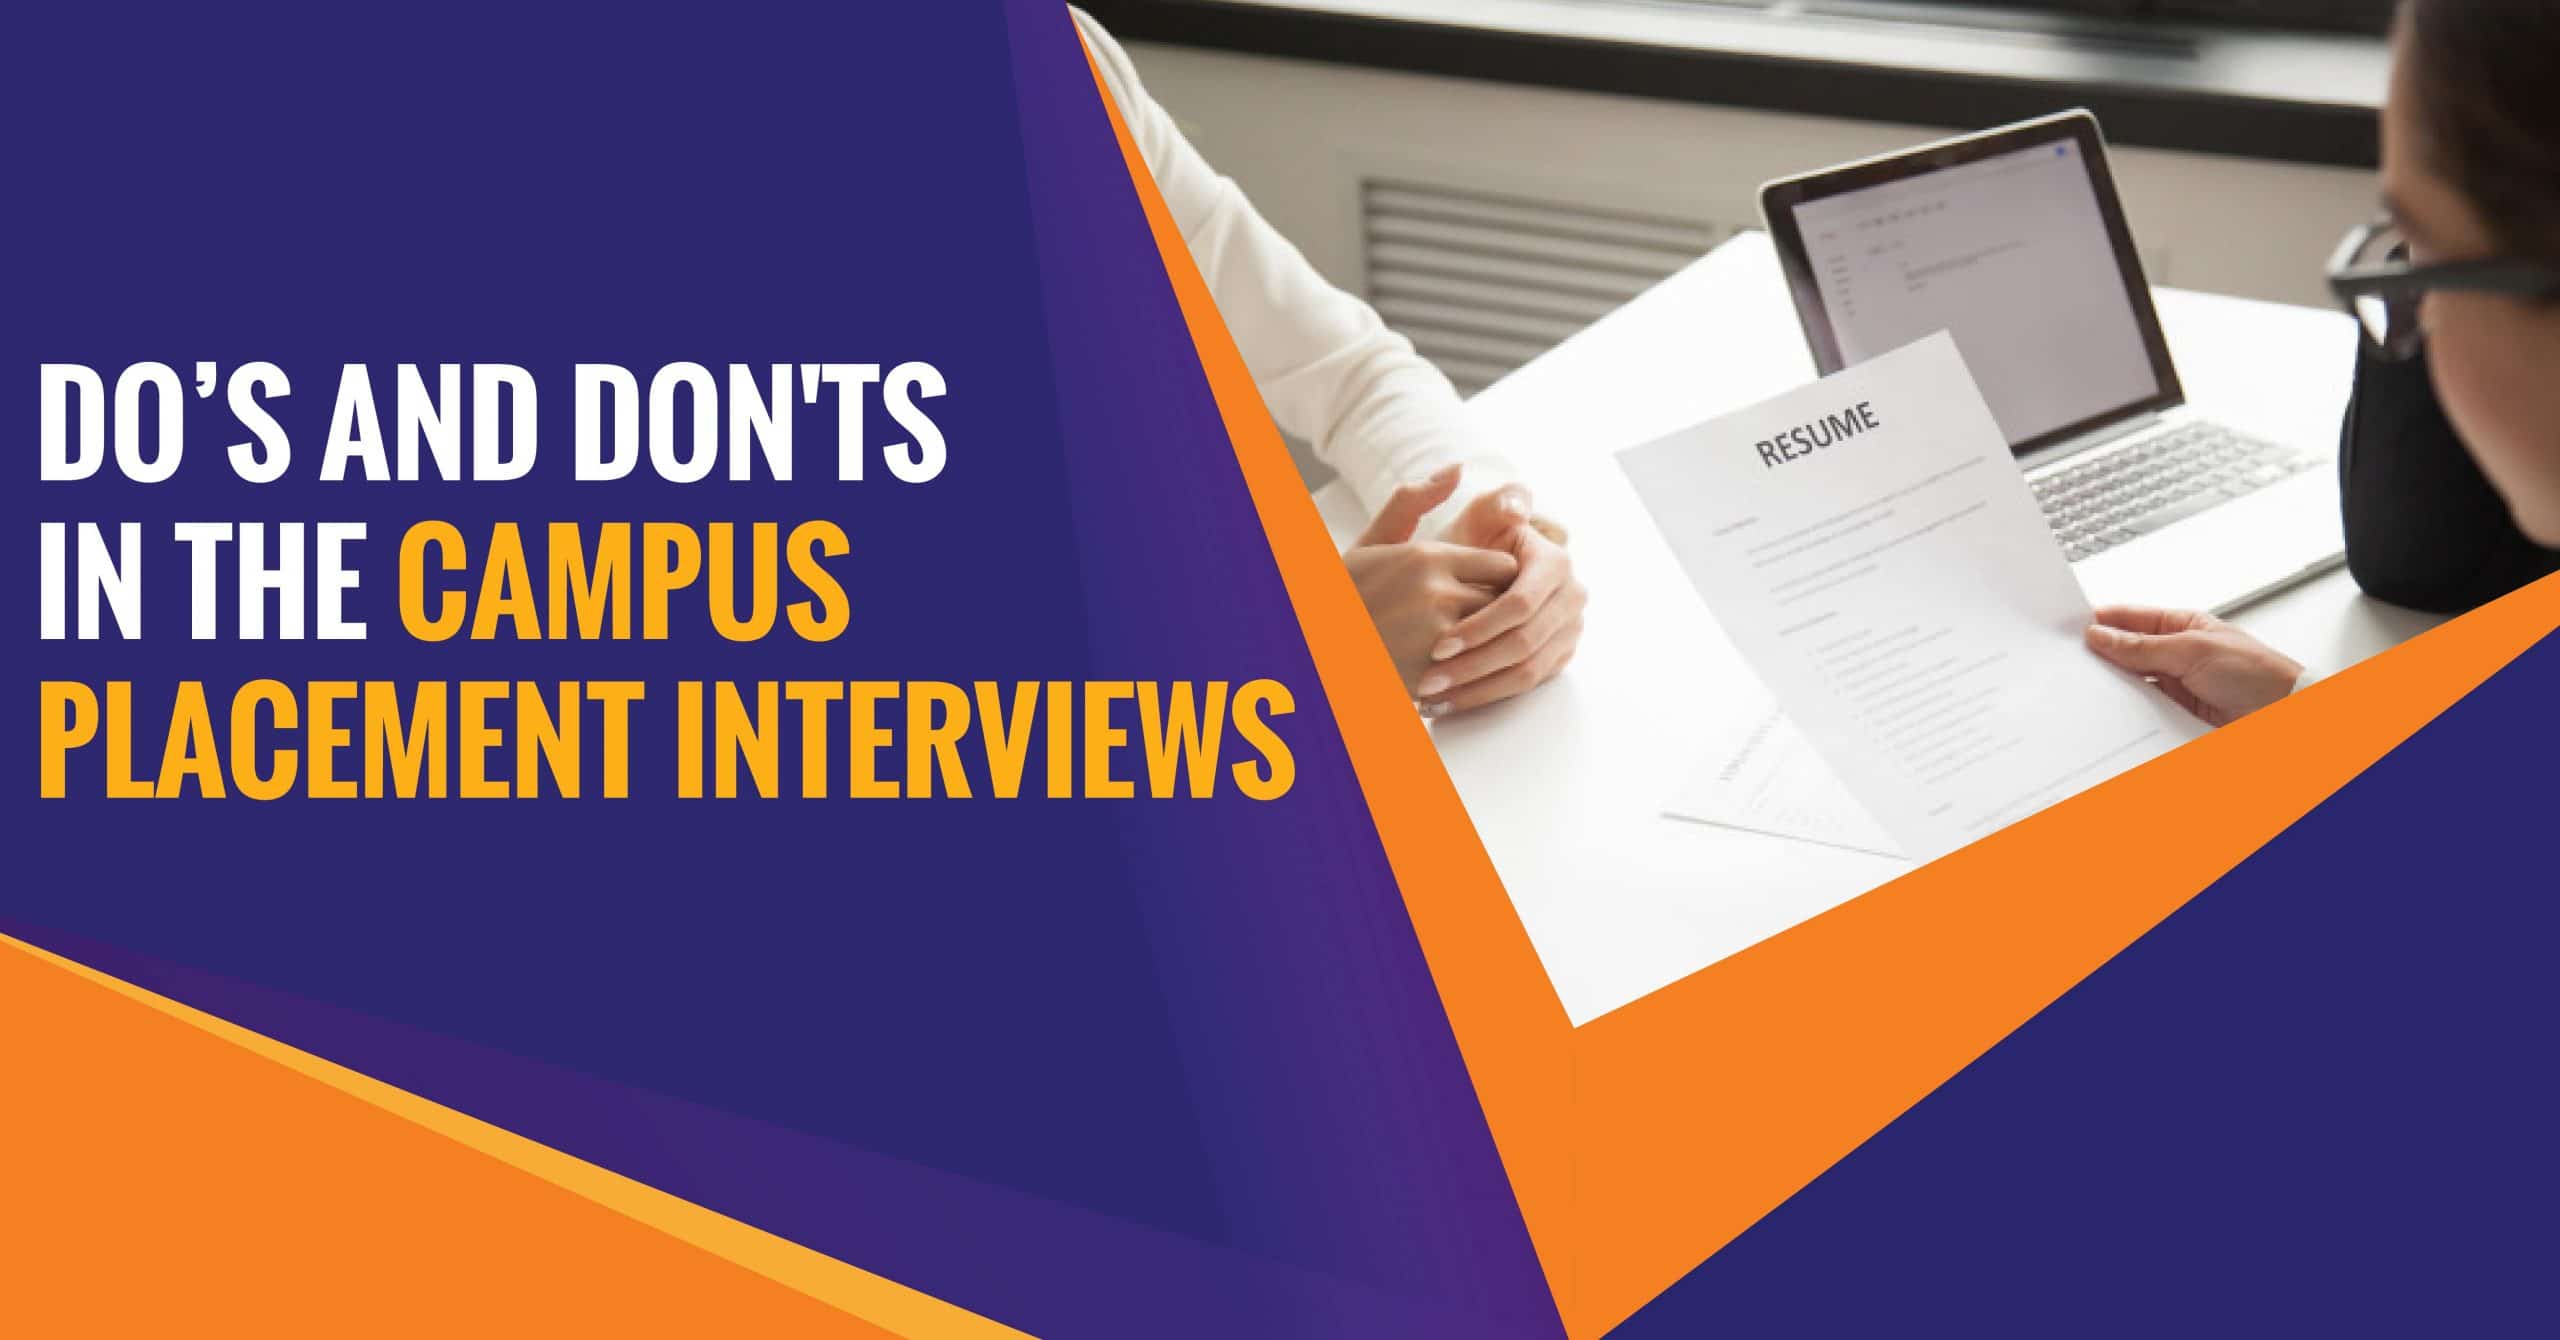 Do’s and Don'ts in the Campus Placement Interviews